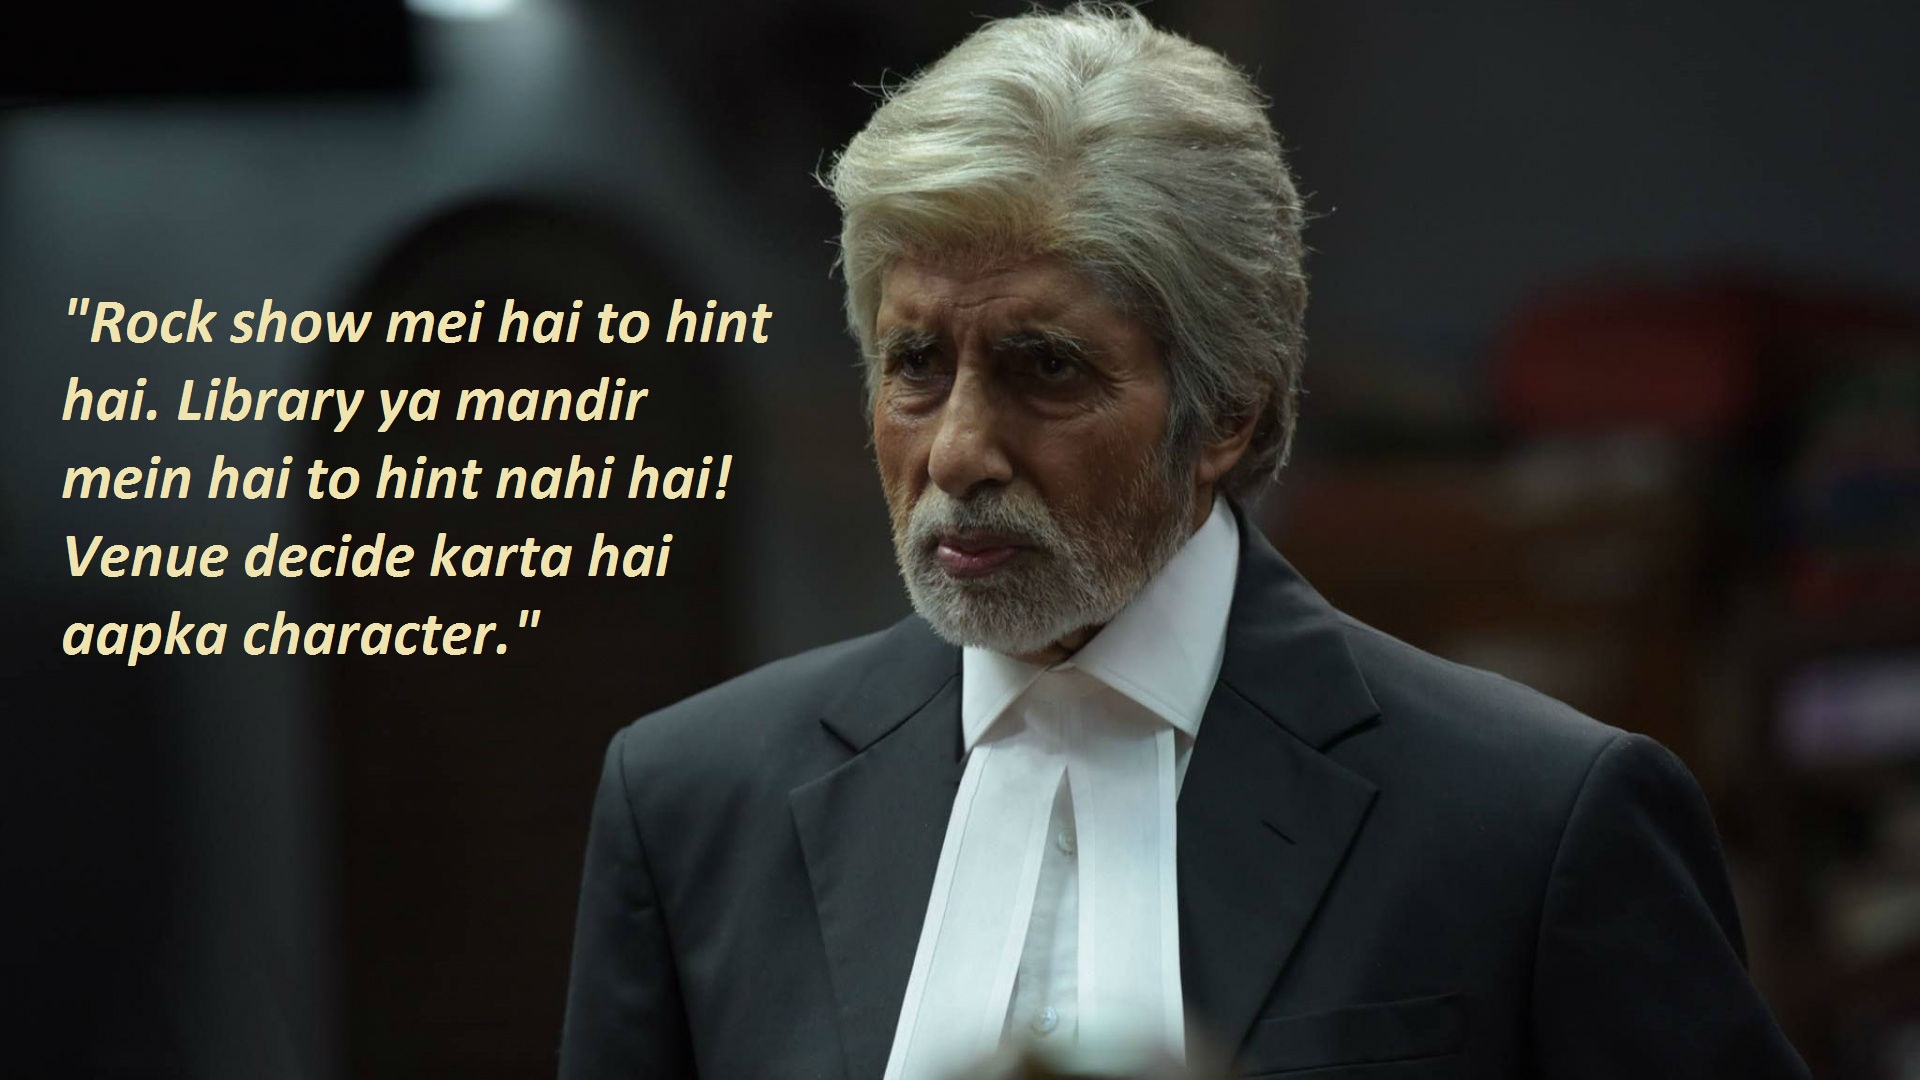 5. Best Dialogues From PINK Movie